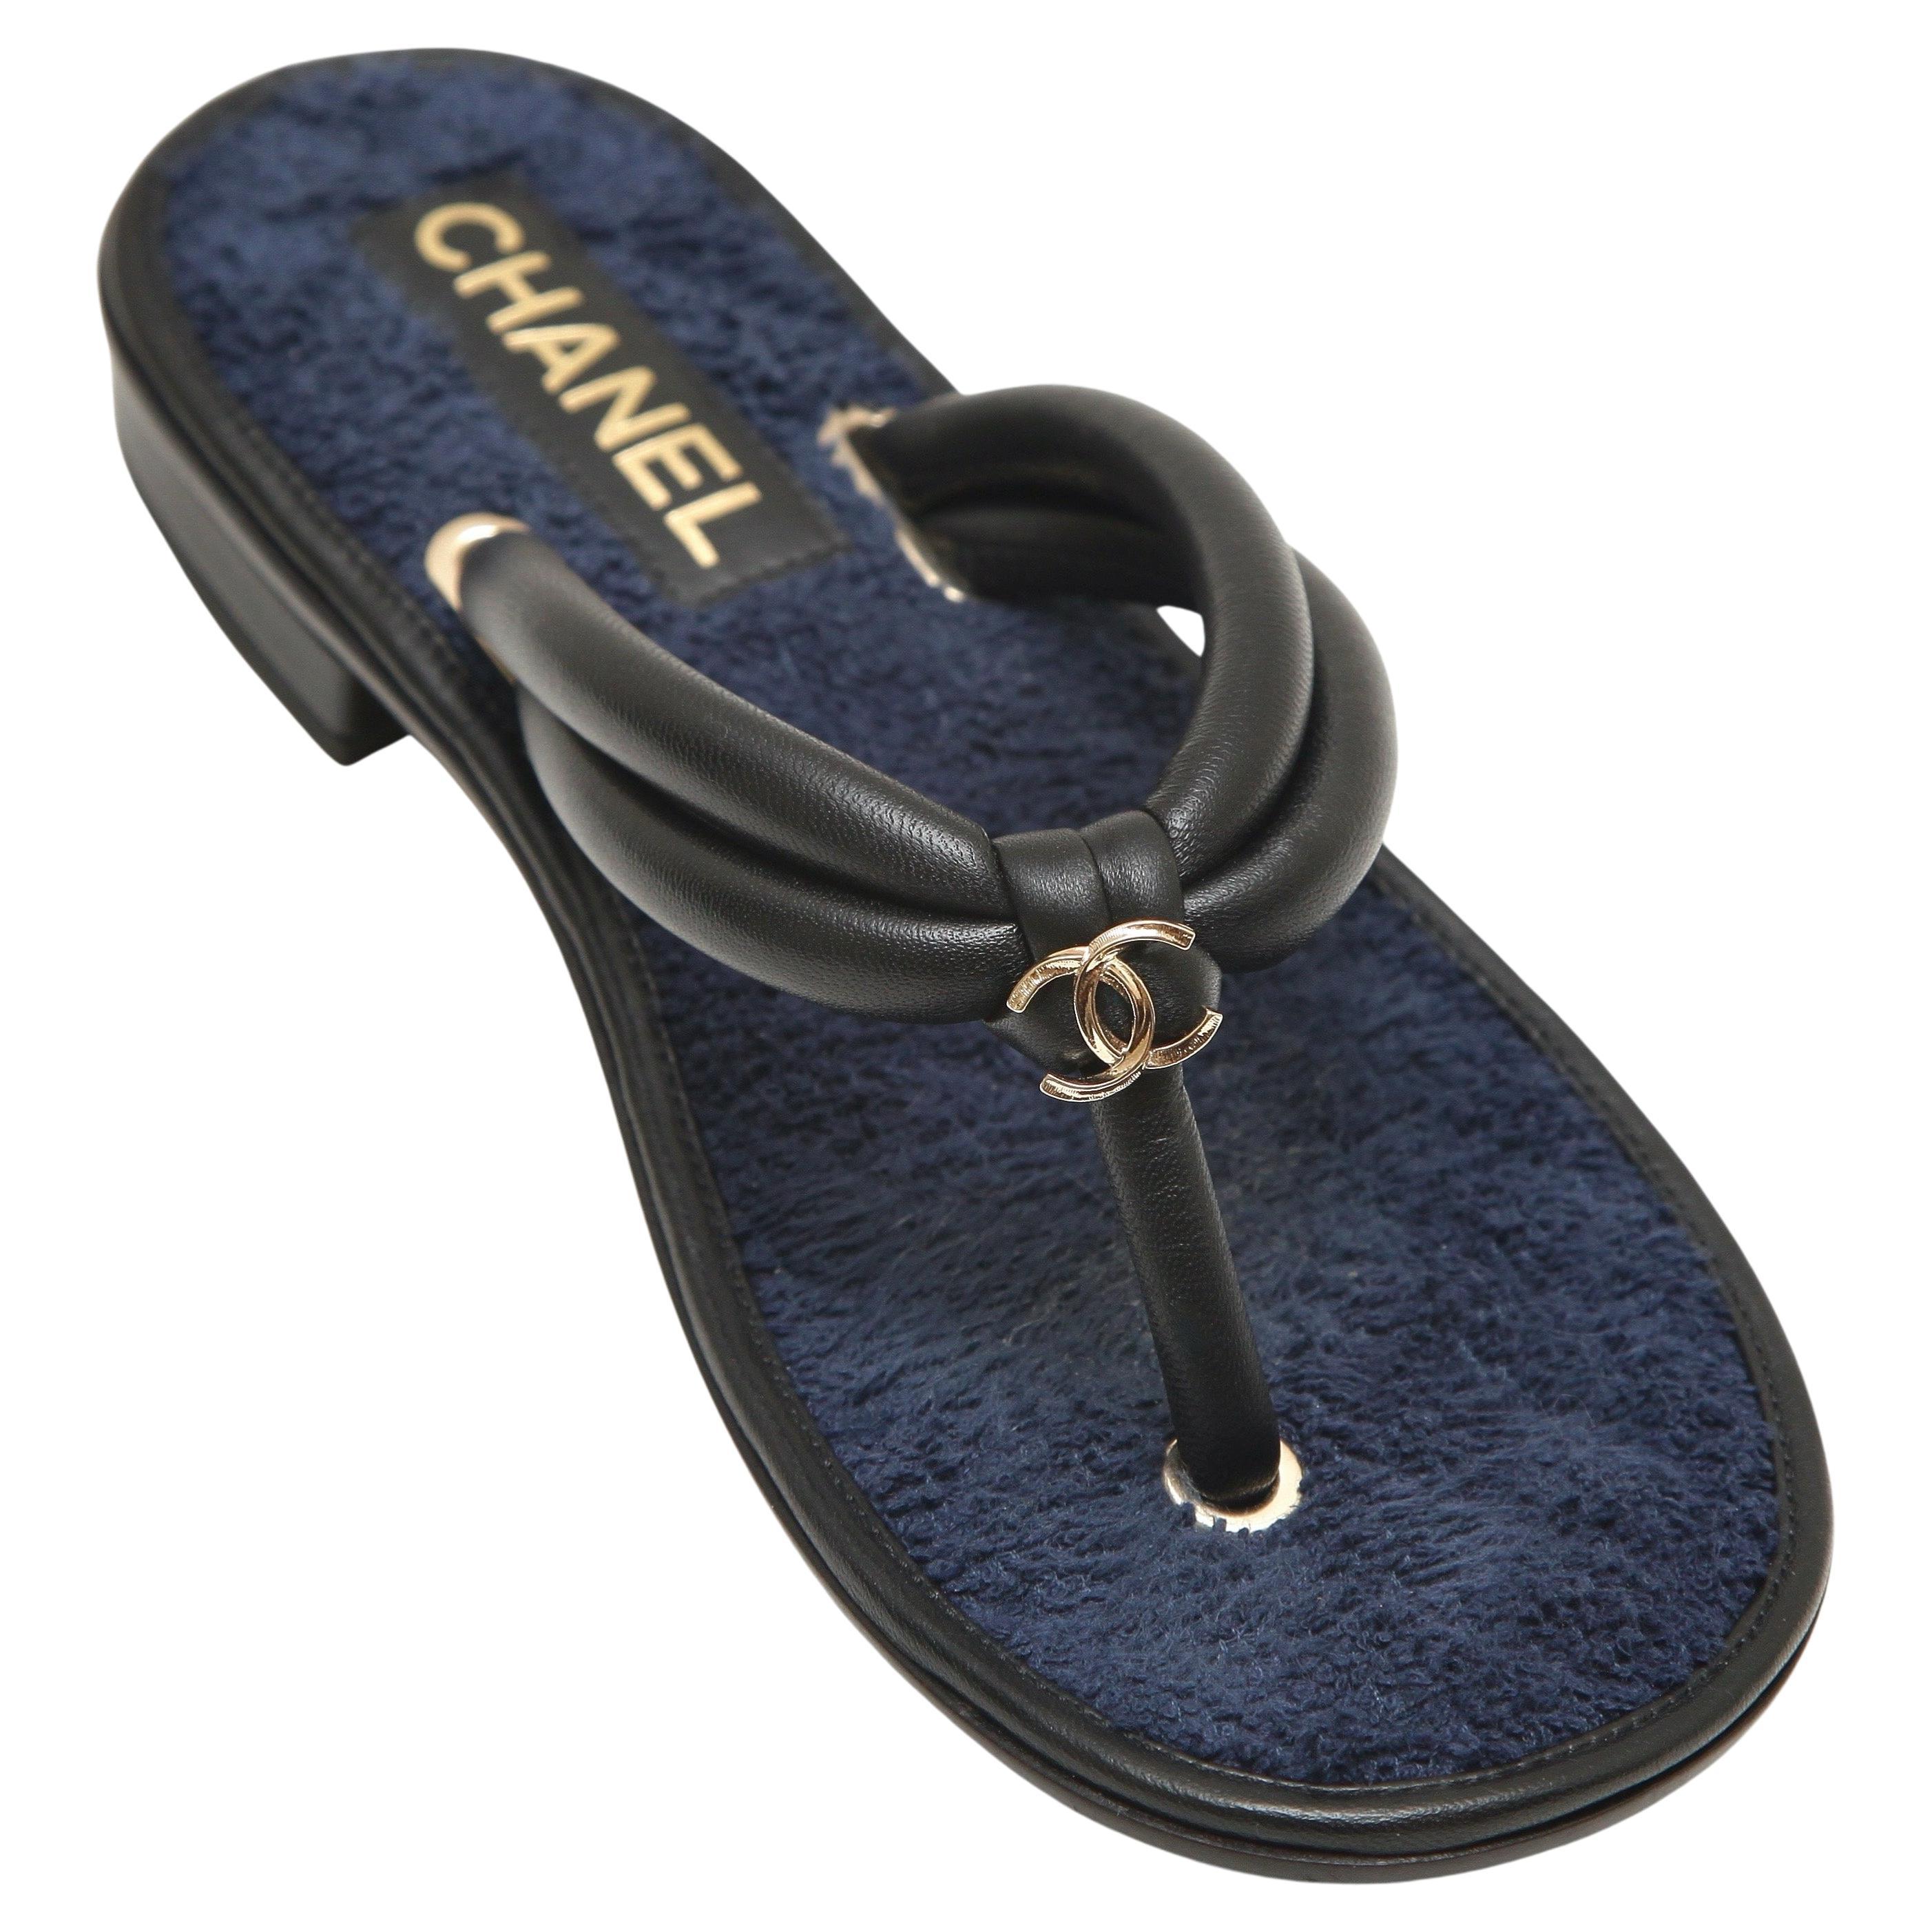 CHANEL Lambskin Leather Slide Thong Sandals Fabric Black Navy Gold